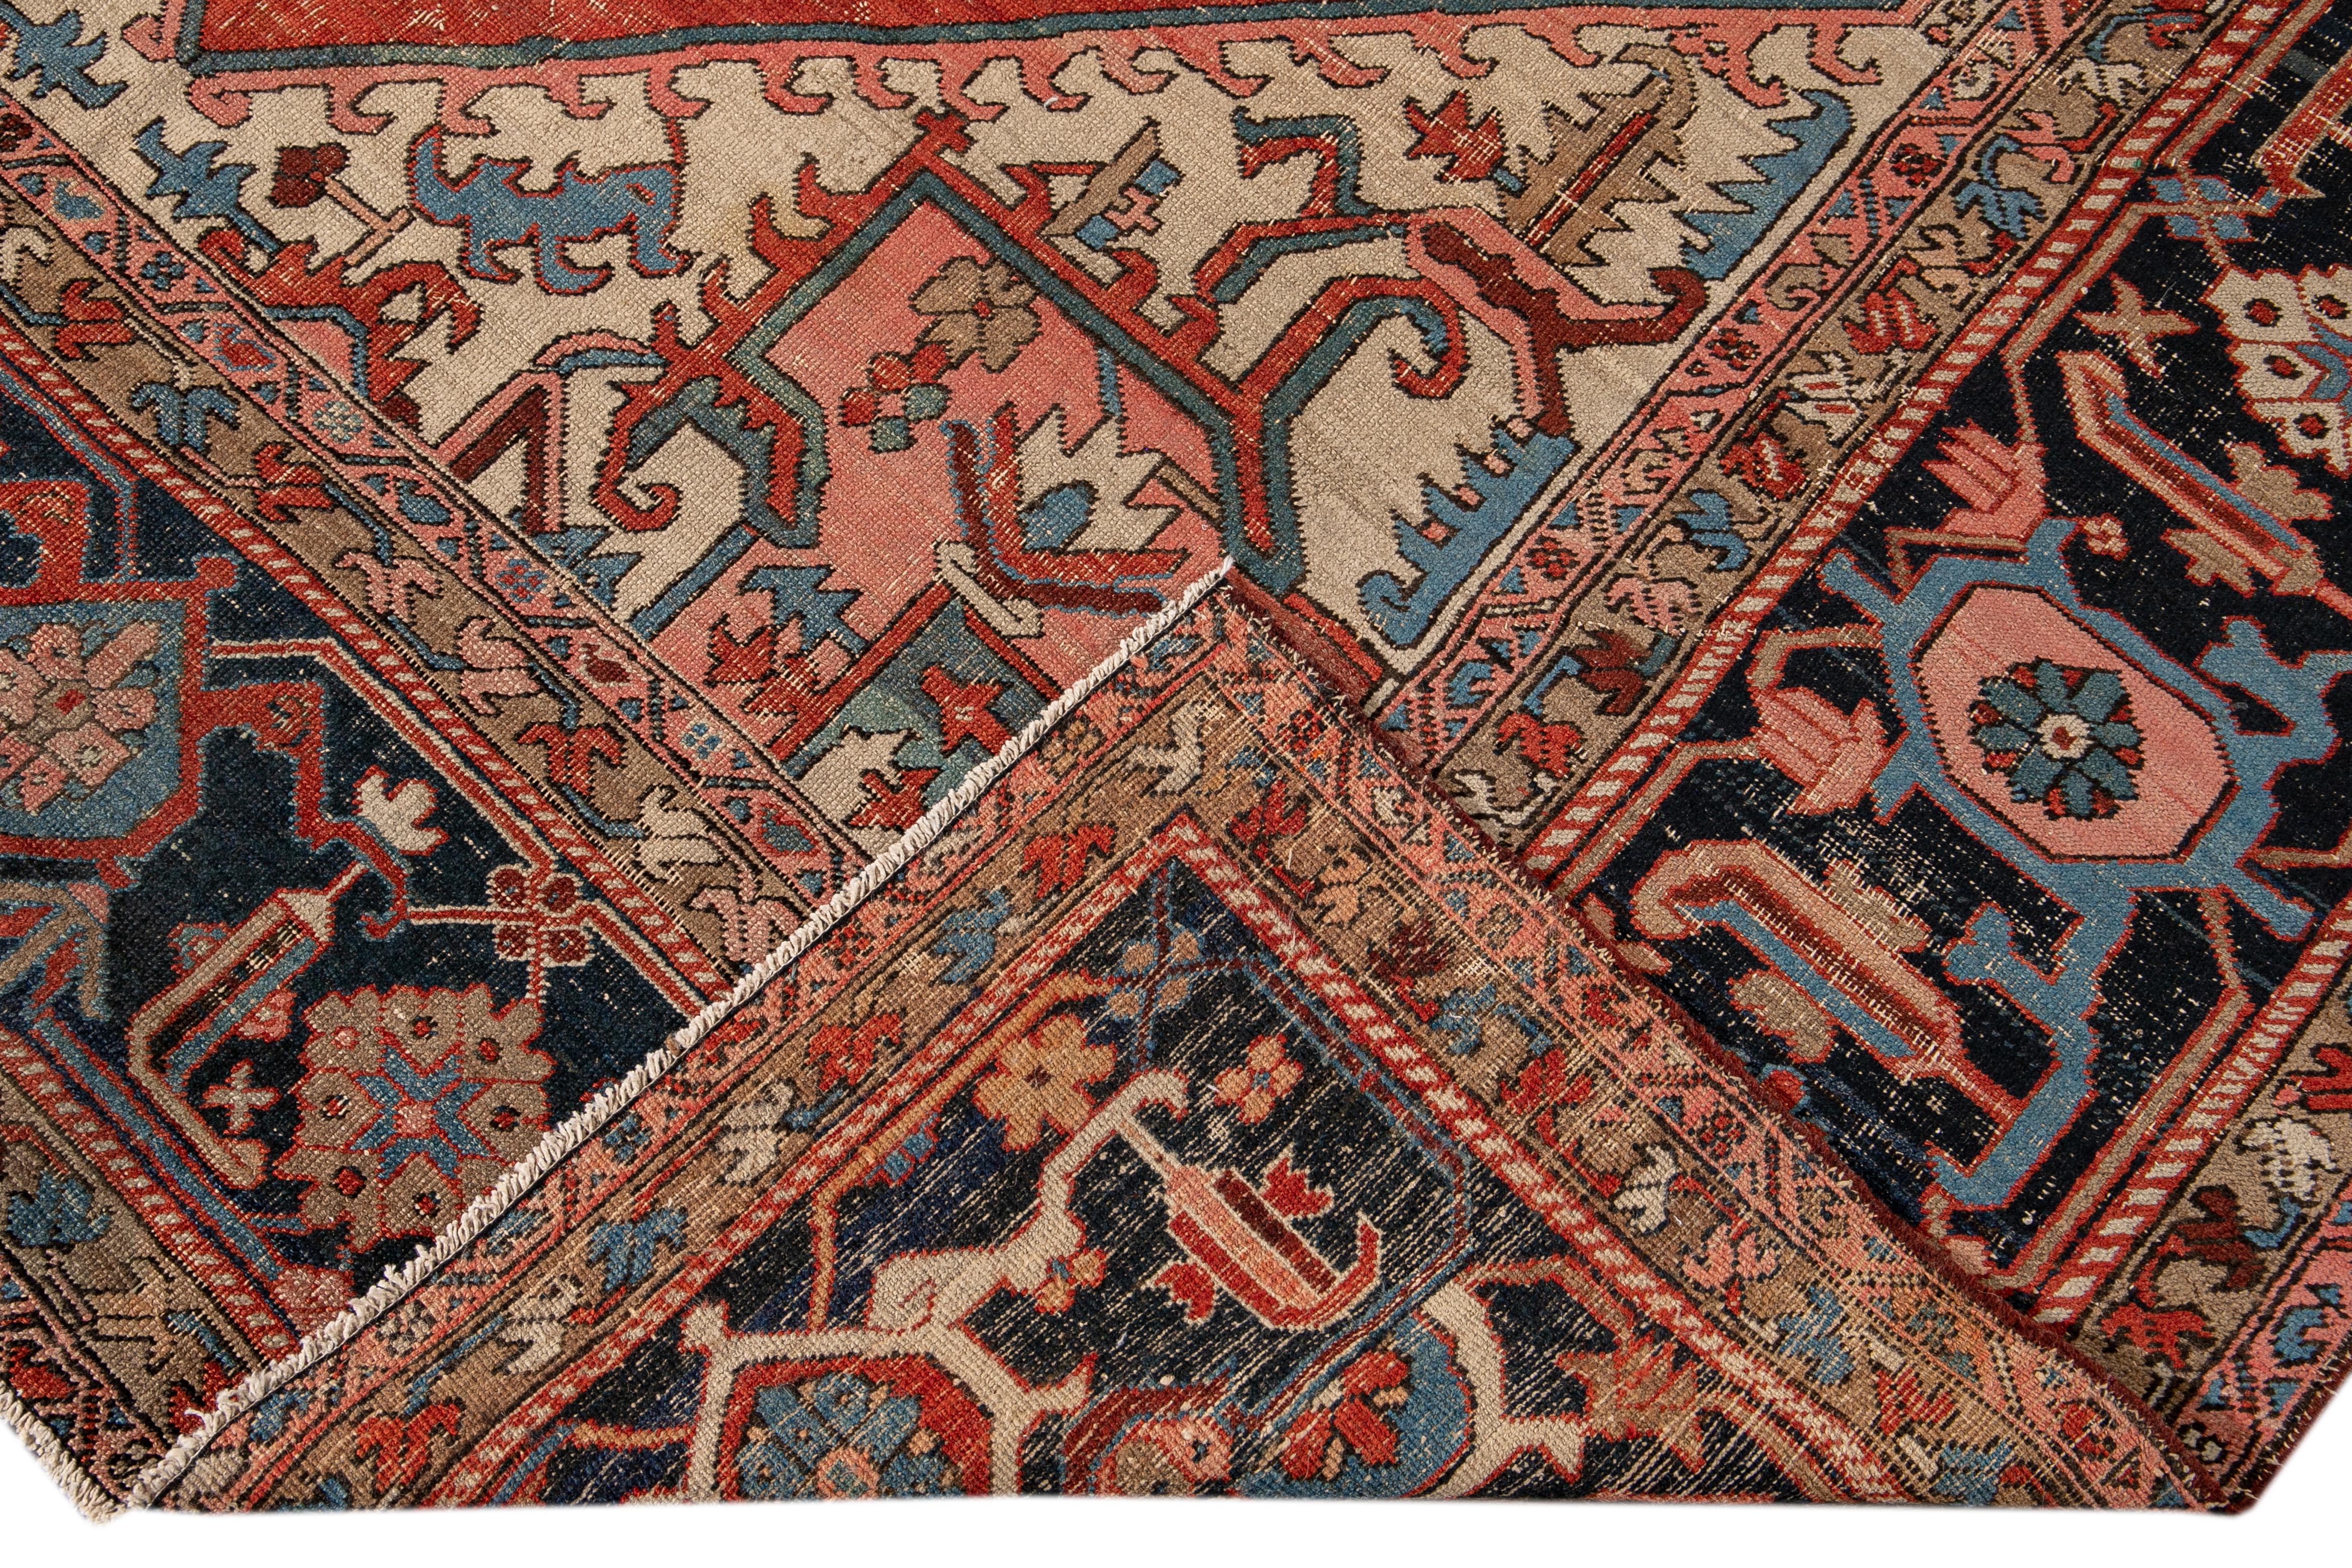 Beautiful antique Persian Serapi hand-knotted wool rug with a red and ivory field. This Heriz rug has a blue frame and peach and brown accents in an all-over gorgeous geometric medallion floral distressed design.

This rug measures: 9'5